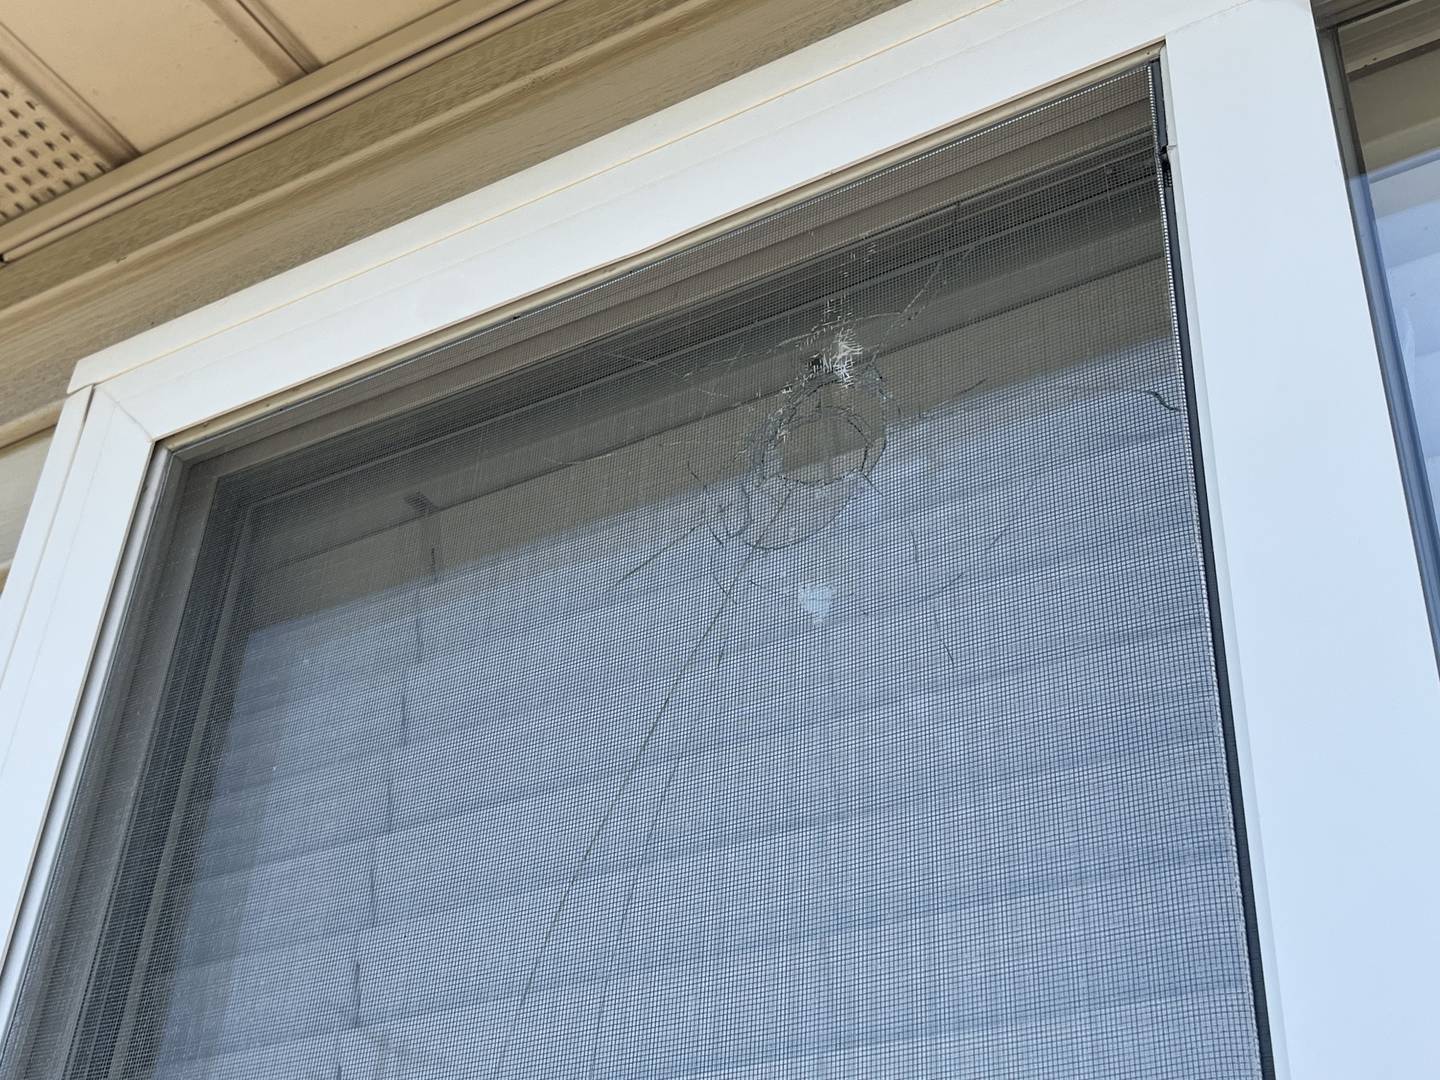 A window of a Romeoville residence damaged by a bullet, seen on Friday, May 26, 2023. A shooting occurred on Thursday, May 26, 2023, near the area as officers were trying to apprehend a suspect in a stolen motor vehicle incident.